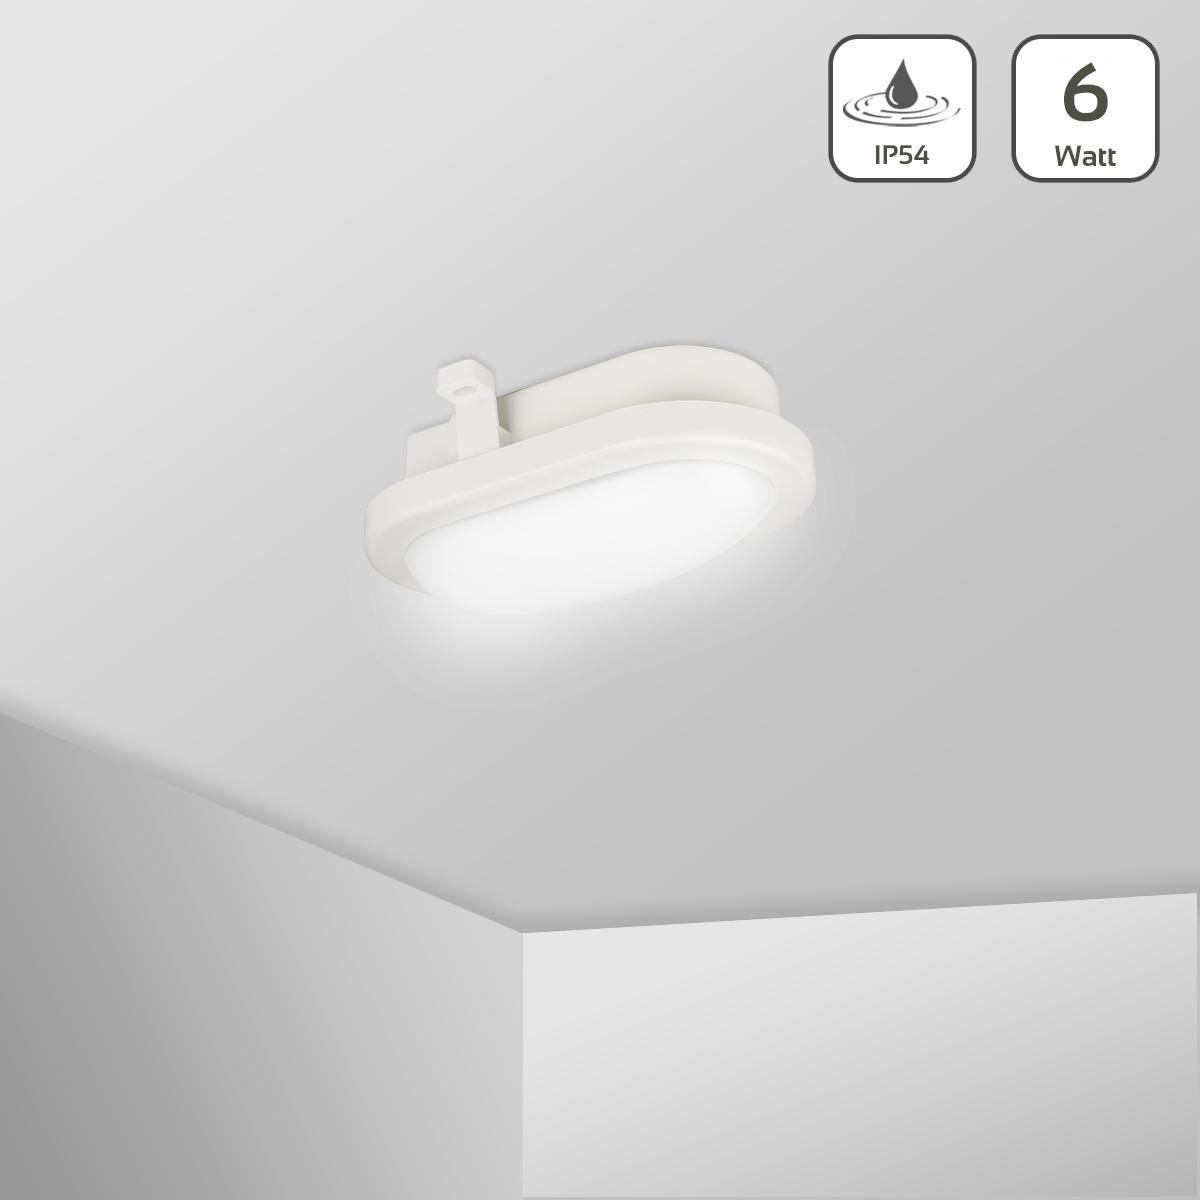 LED Feuchtraumleuchte 6W 420lm 5000K IP54